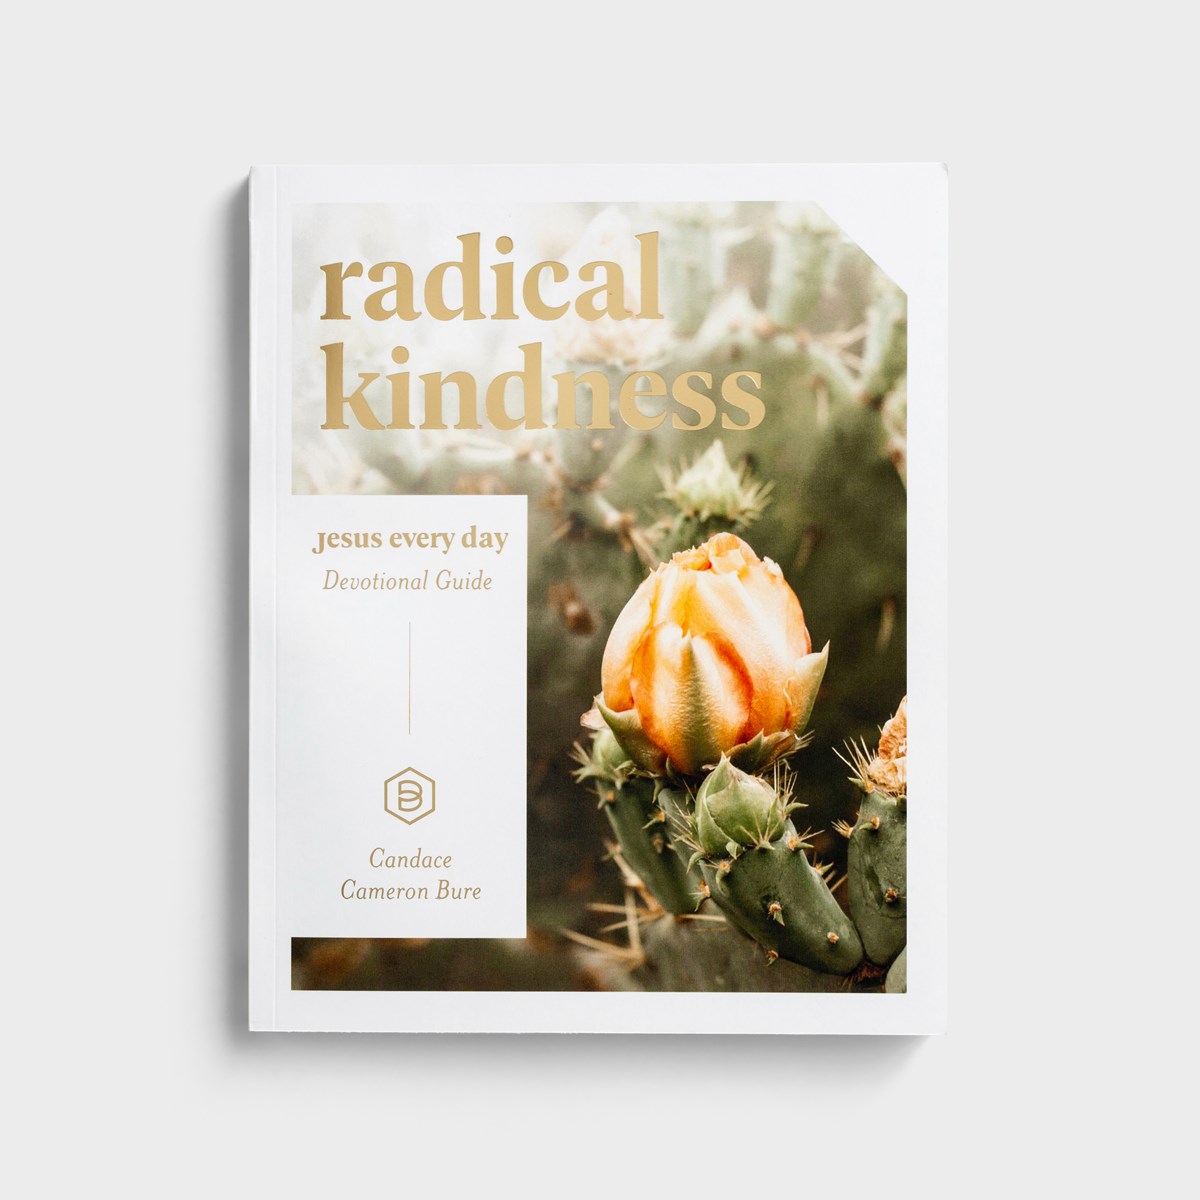 Candace Cameron Bure - Jesus Every Day: Radical Kindness - Devotional Guide